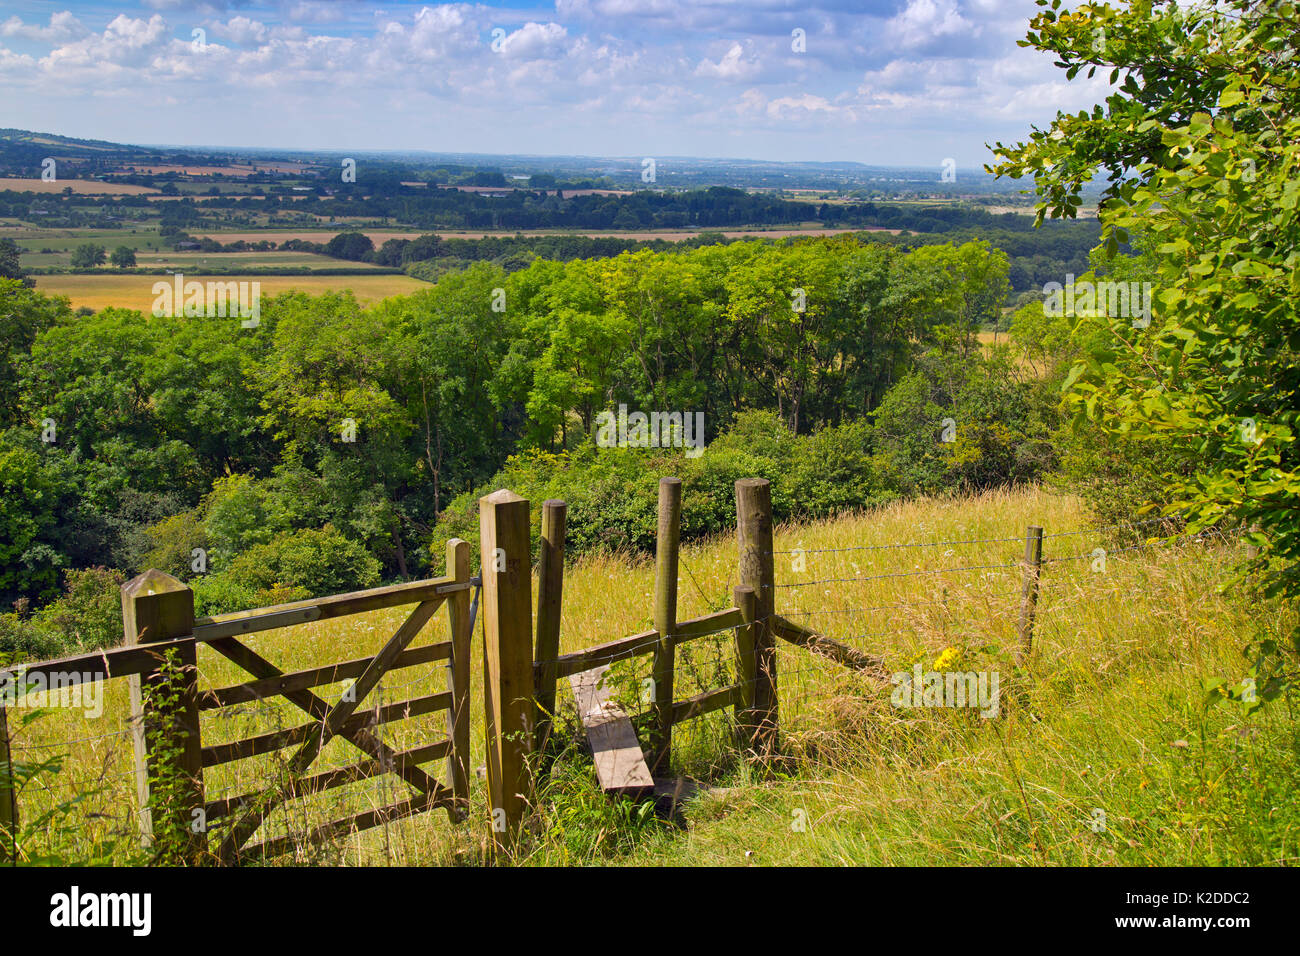 Stile and footpath, Aldbury Nowers Nature Reserve, the Chilterns, Hertfordshire, UK, July 2016, Stock Photo